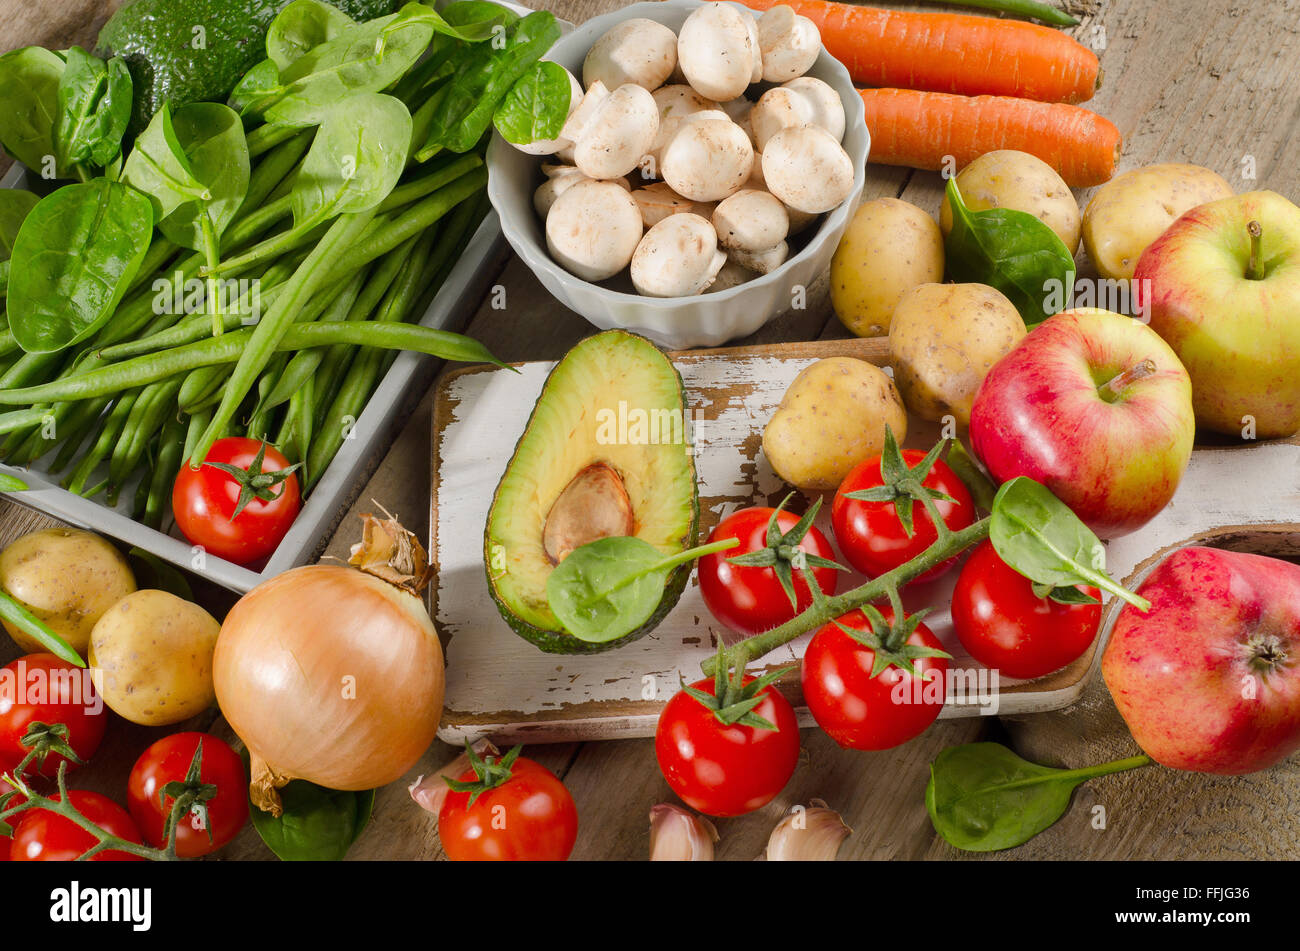 Organic vegetables. Healthy food concept. View from above Stock Photo